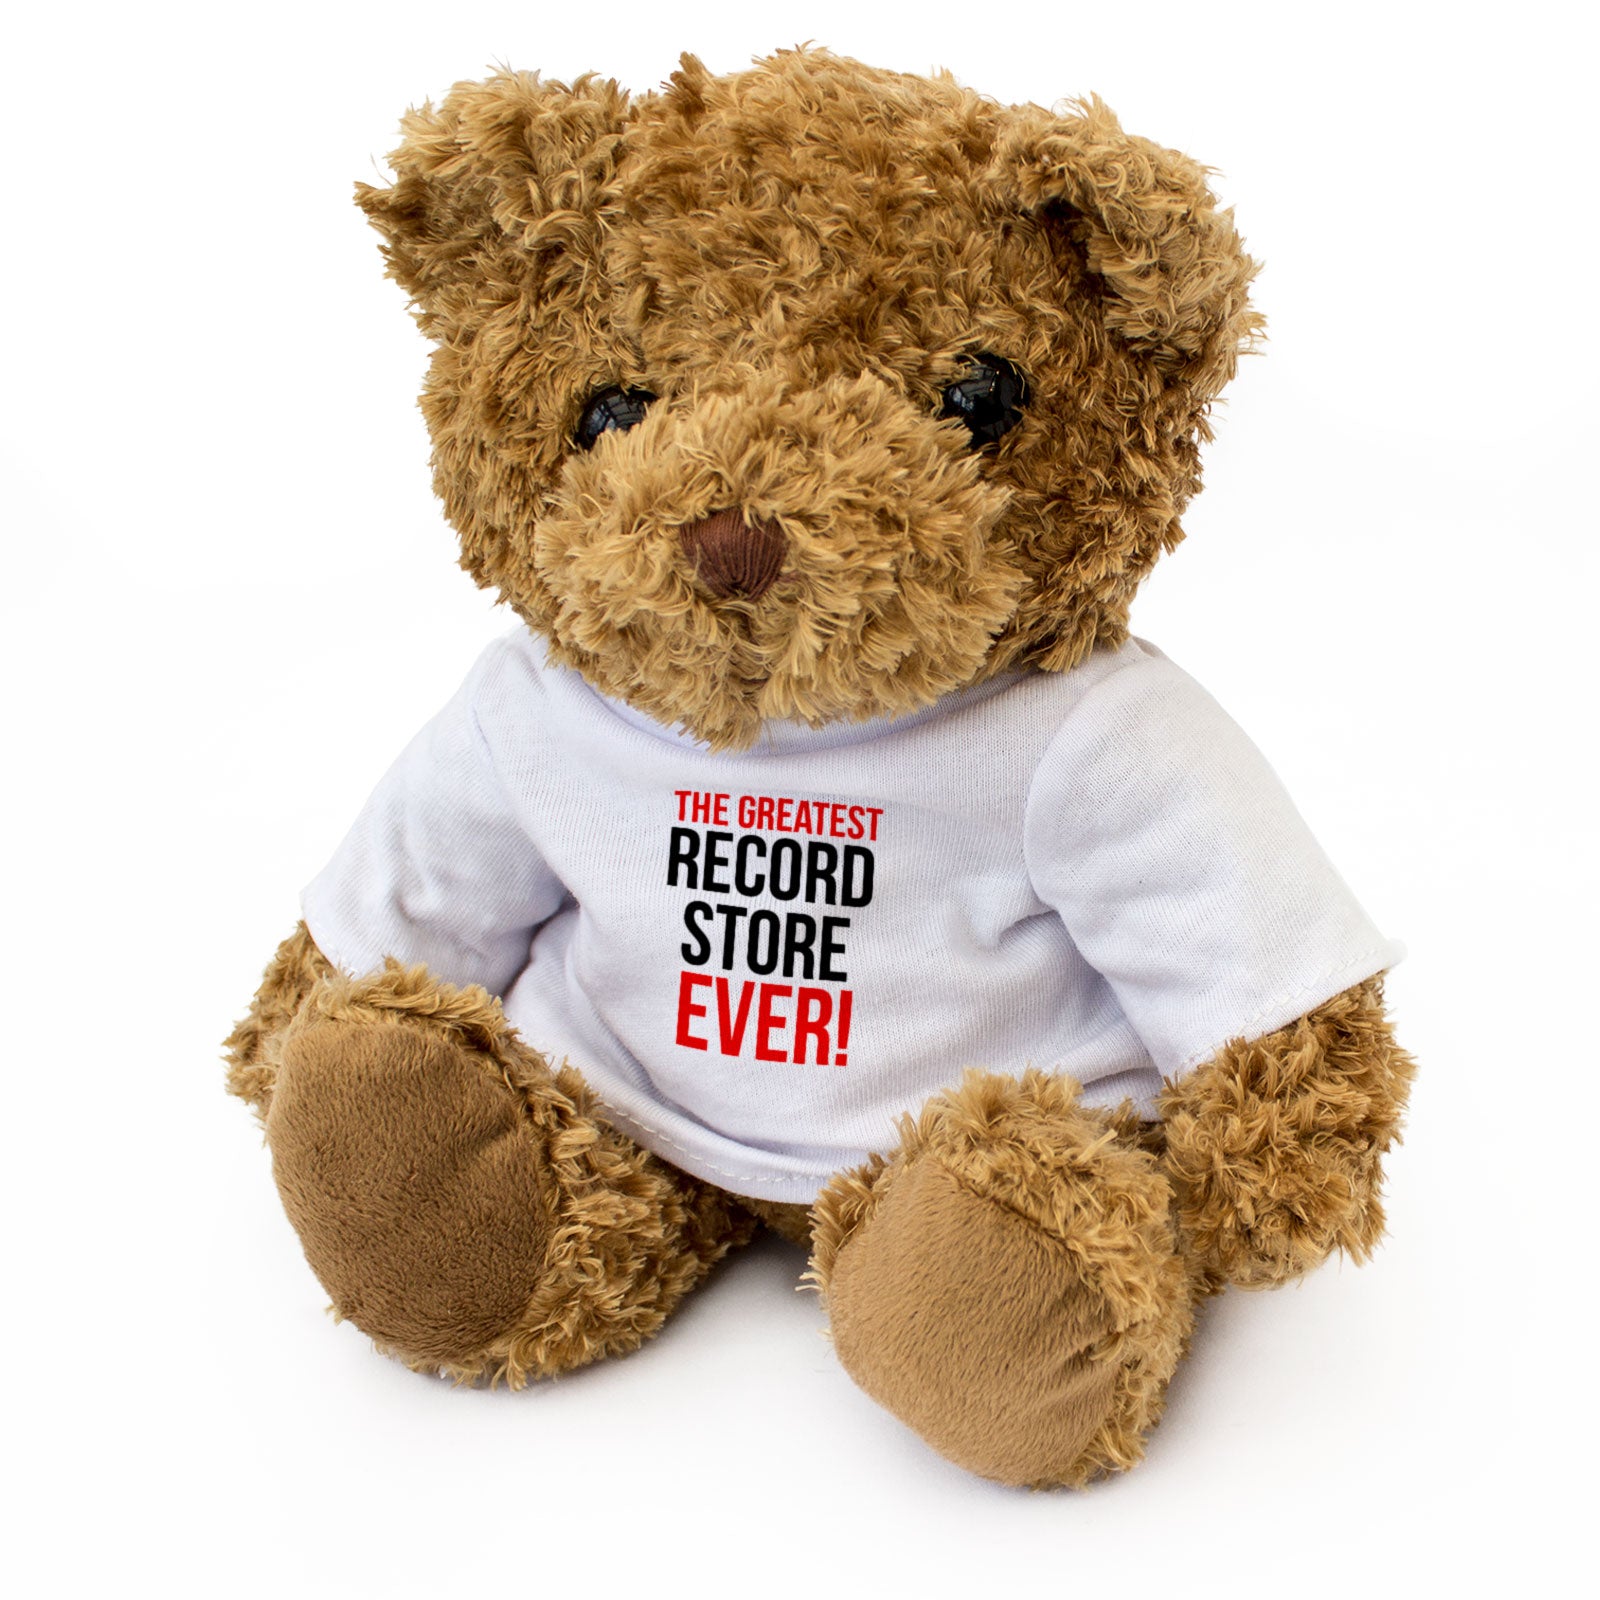 The Greatest Record Store Ever - Teddy Bear